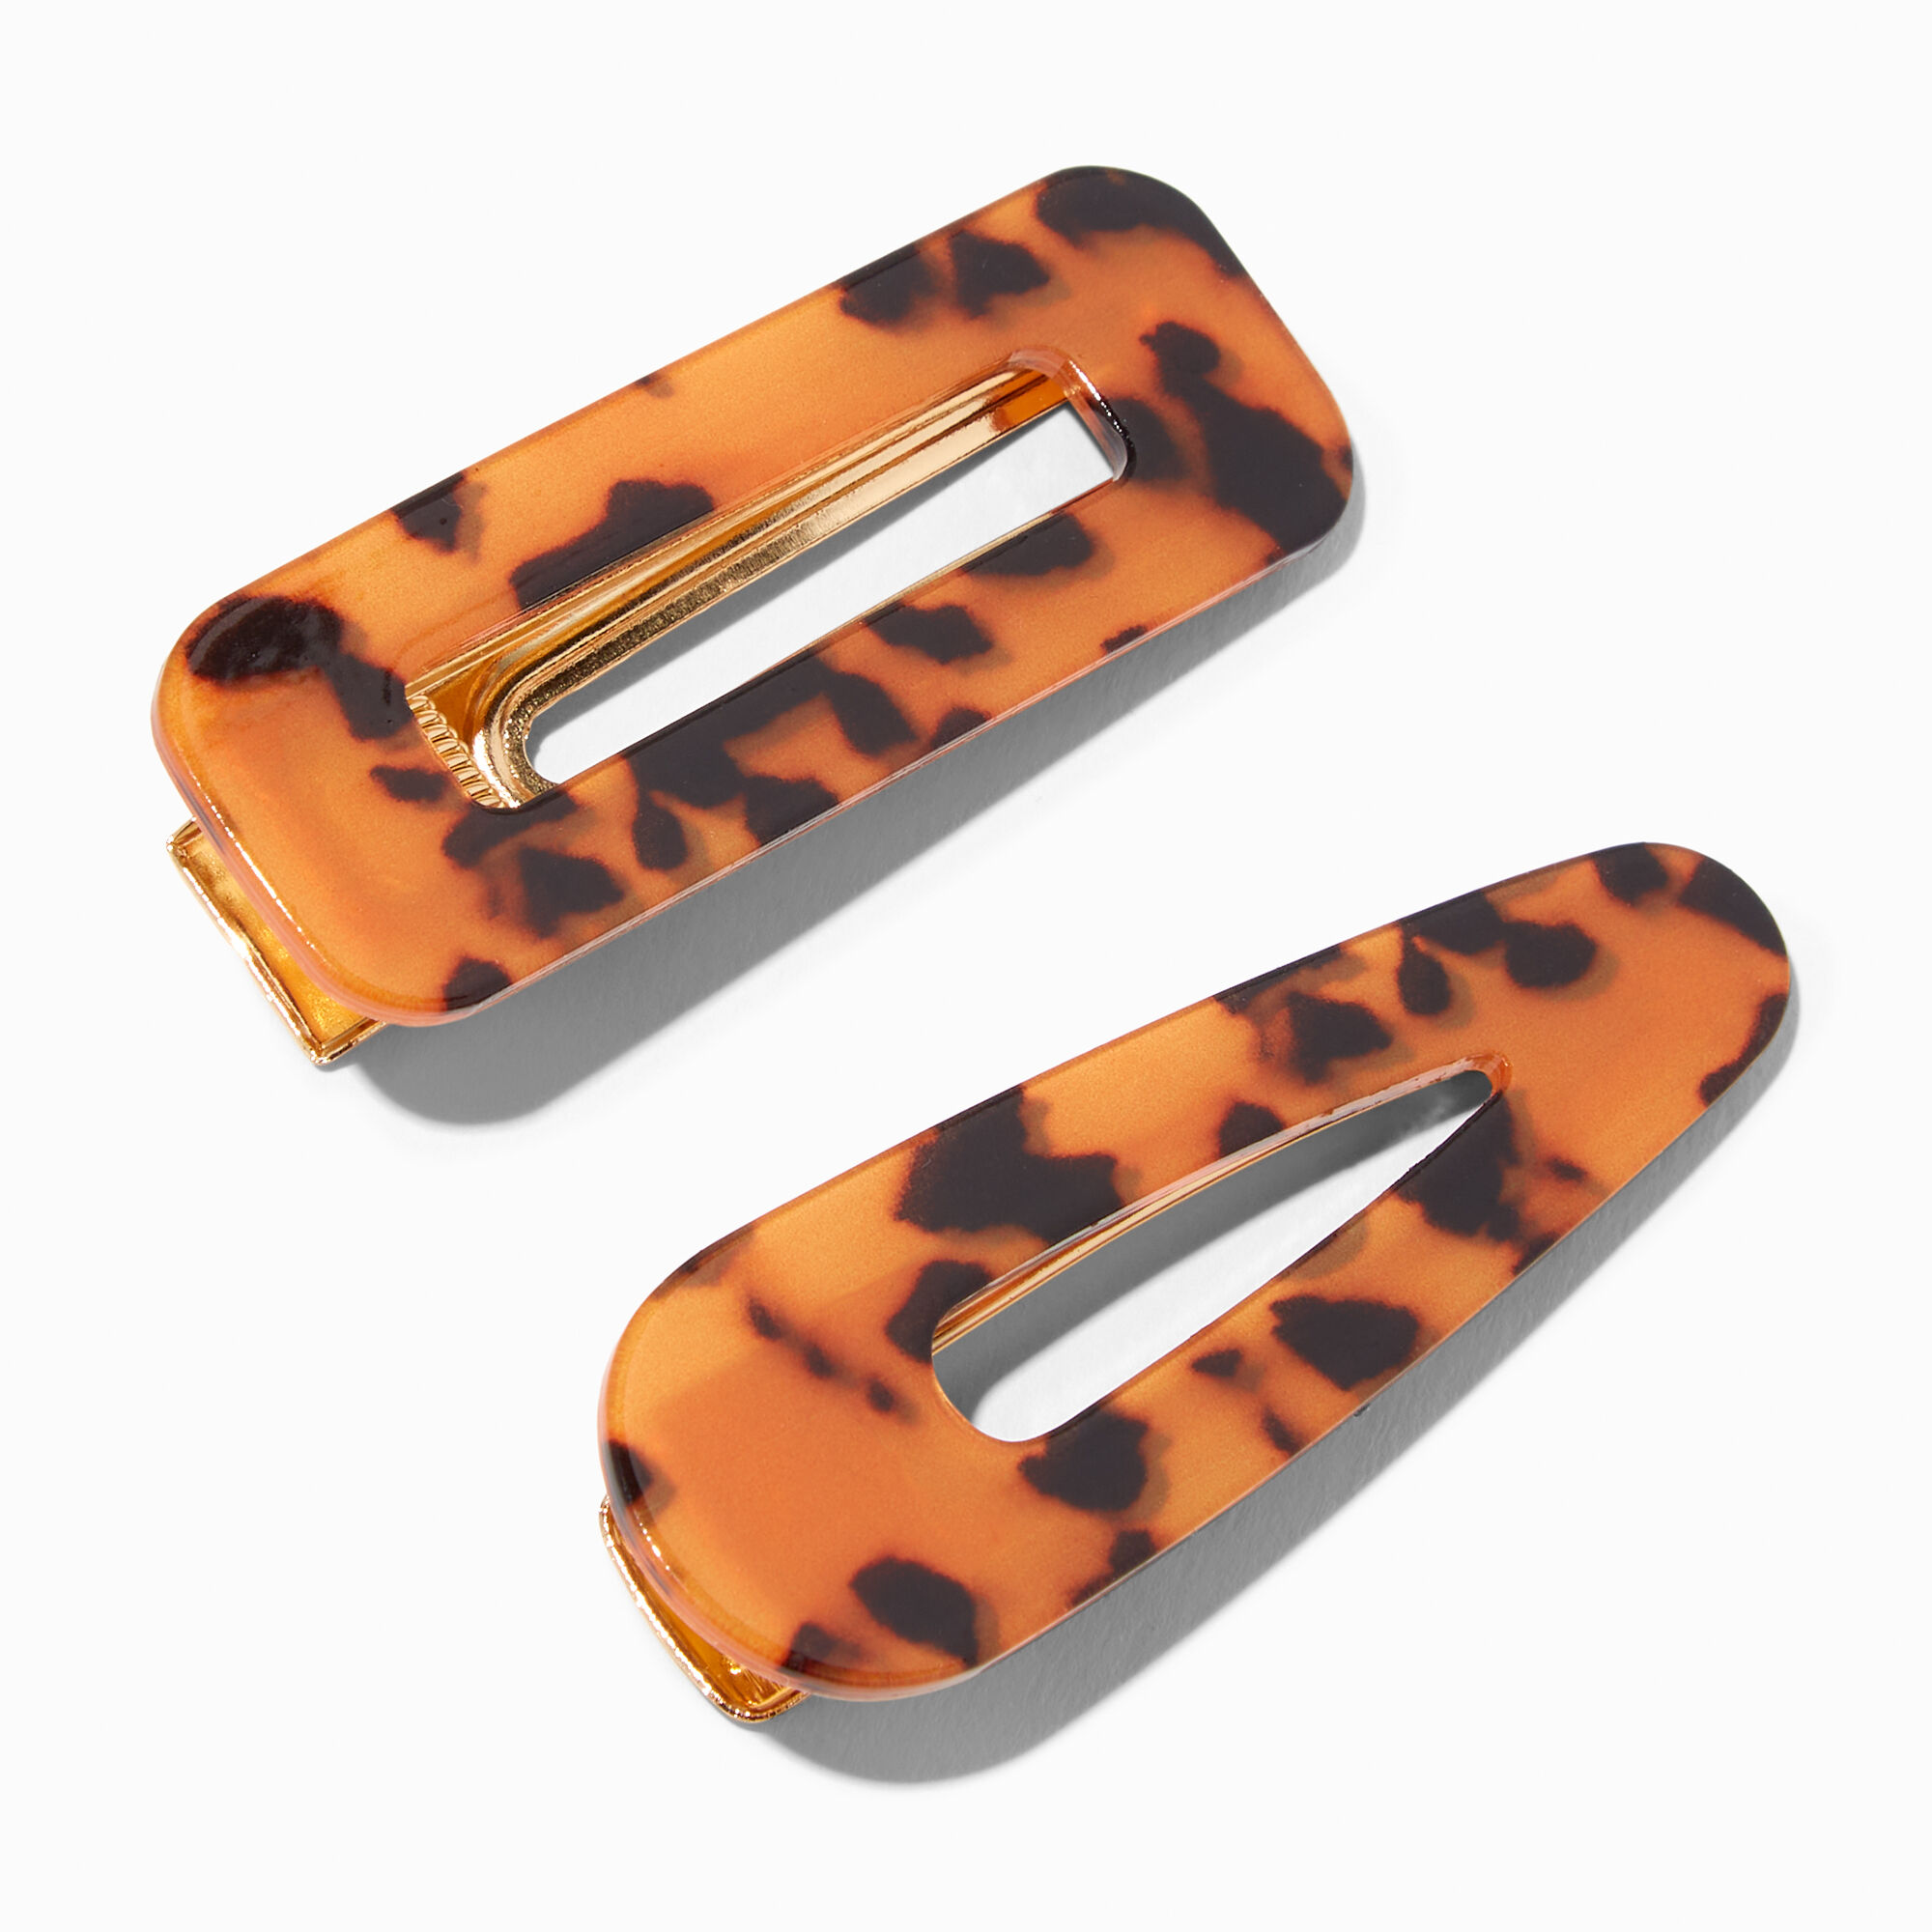 View Claires Tortoiseshell Hair Clips 2 Packbrown Gold information